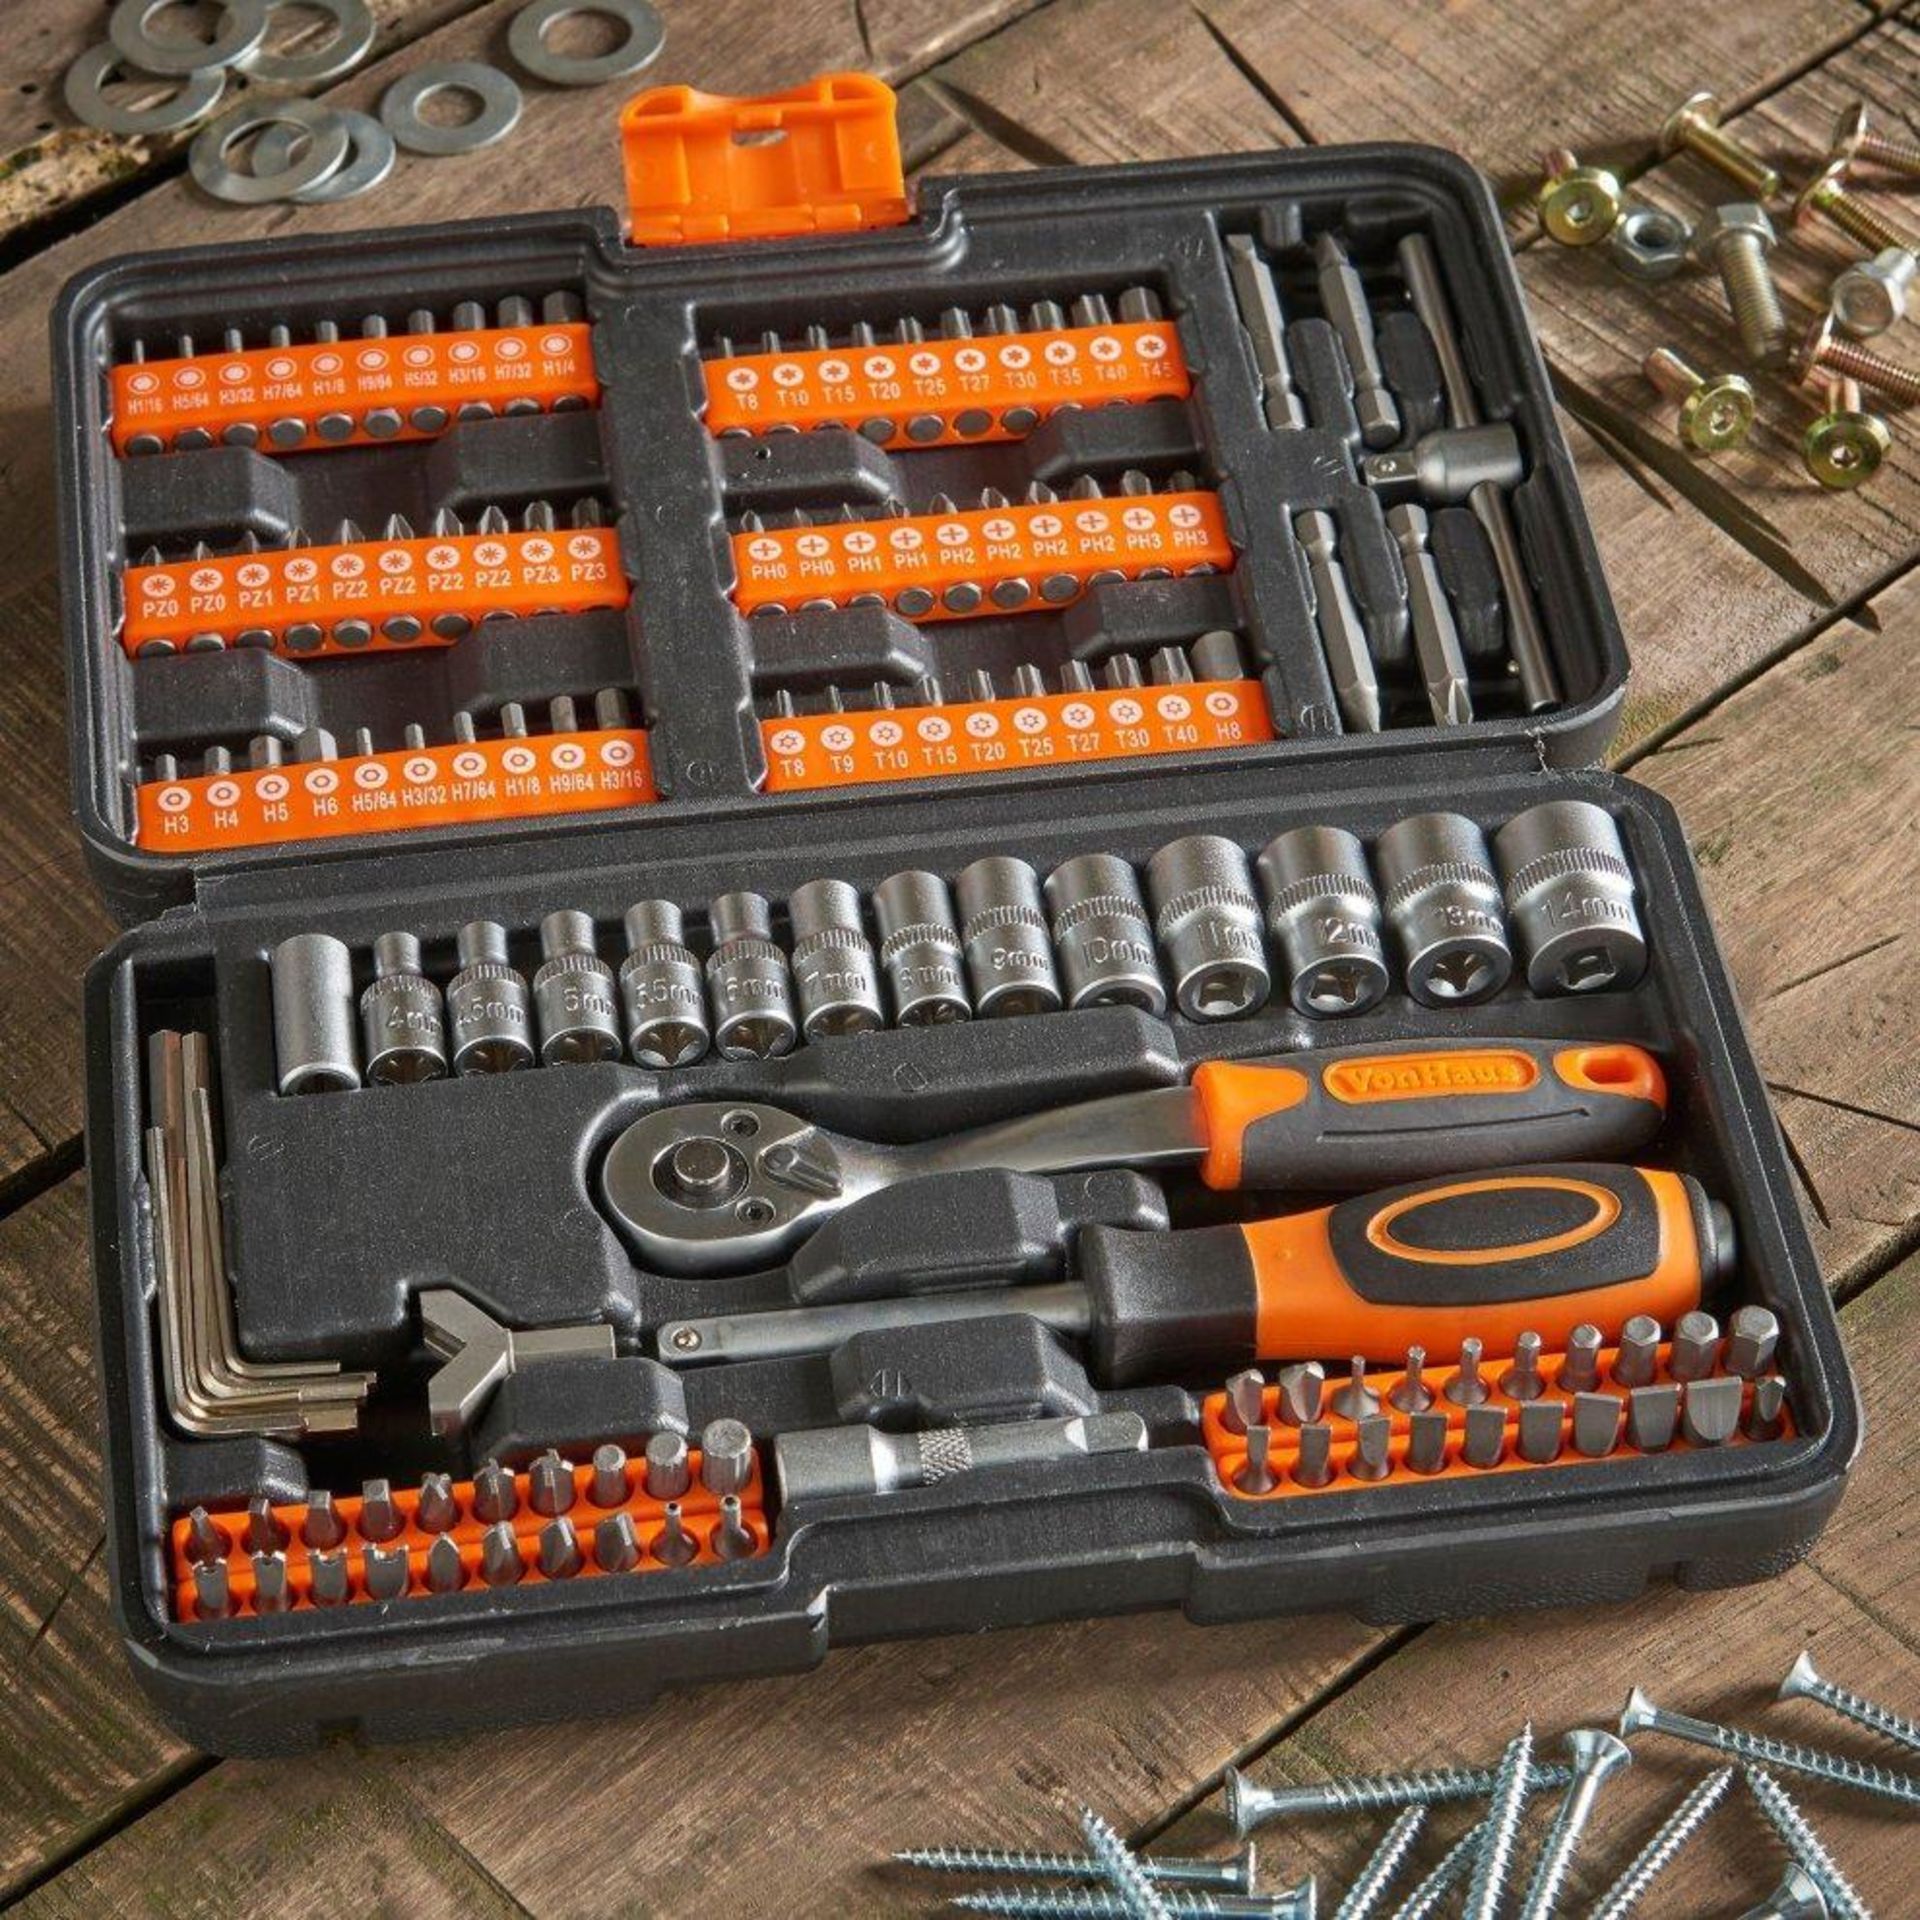 130pc Socket + Bit Set - ER51.Be prepared for the unexpected with the Luxury 130pc Socket + Bit Set. - Image 2 of 6